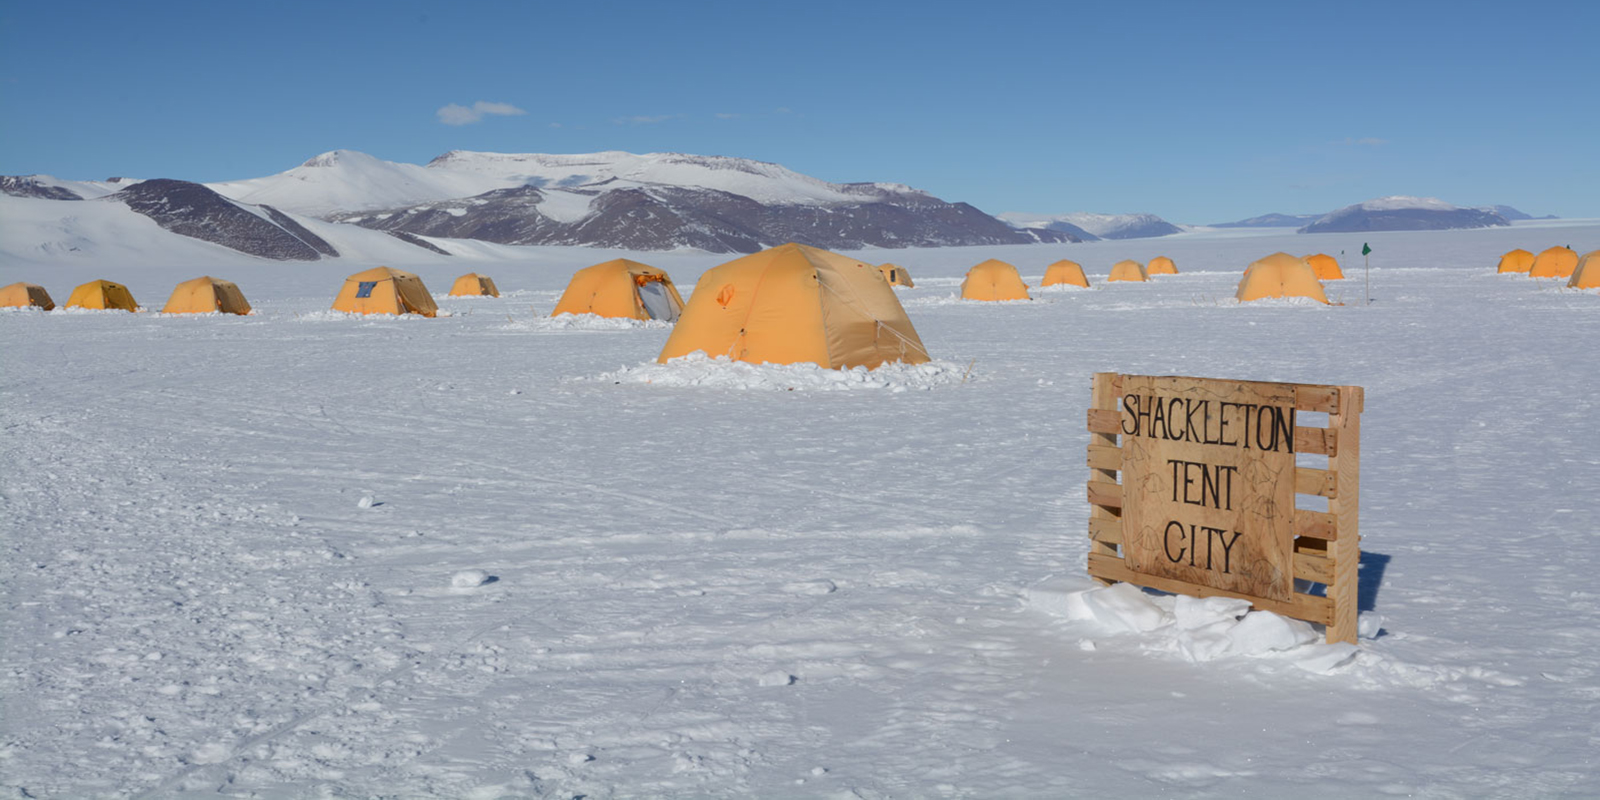 yellow tents sporadically placed on the snow form a camp